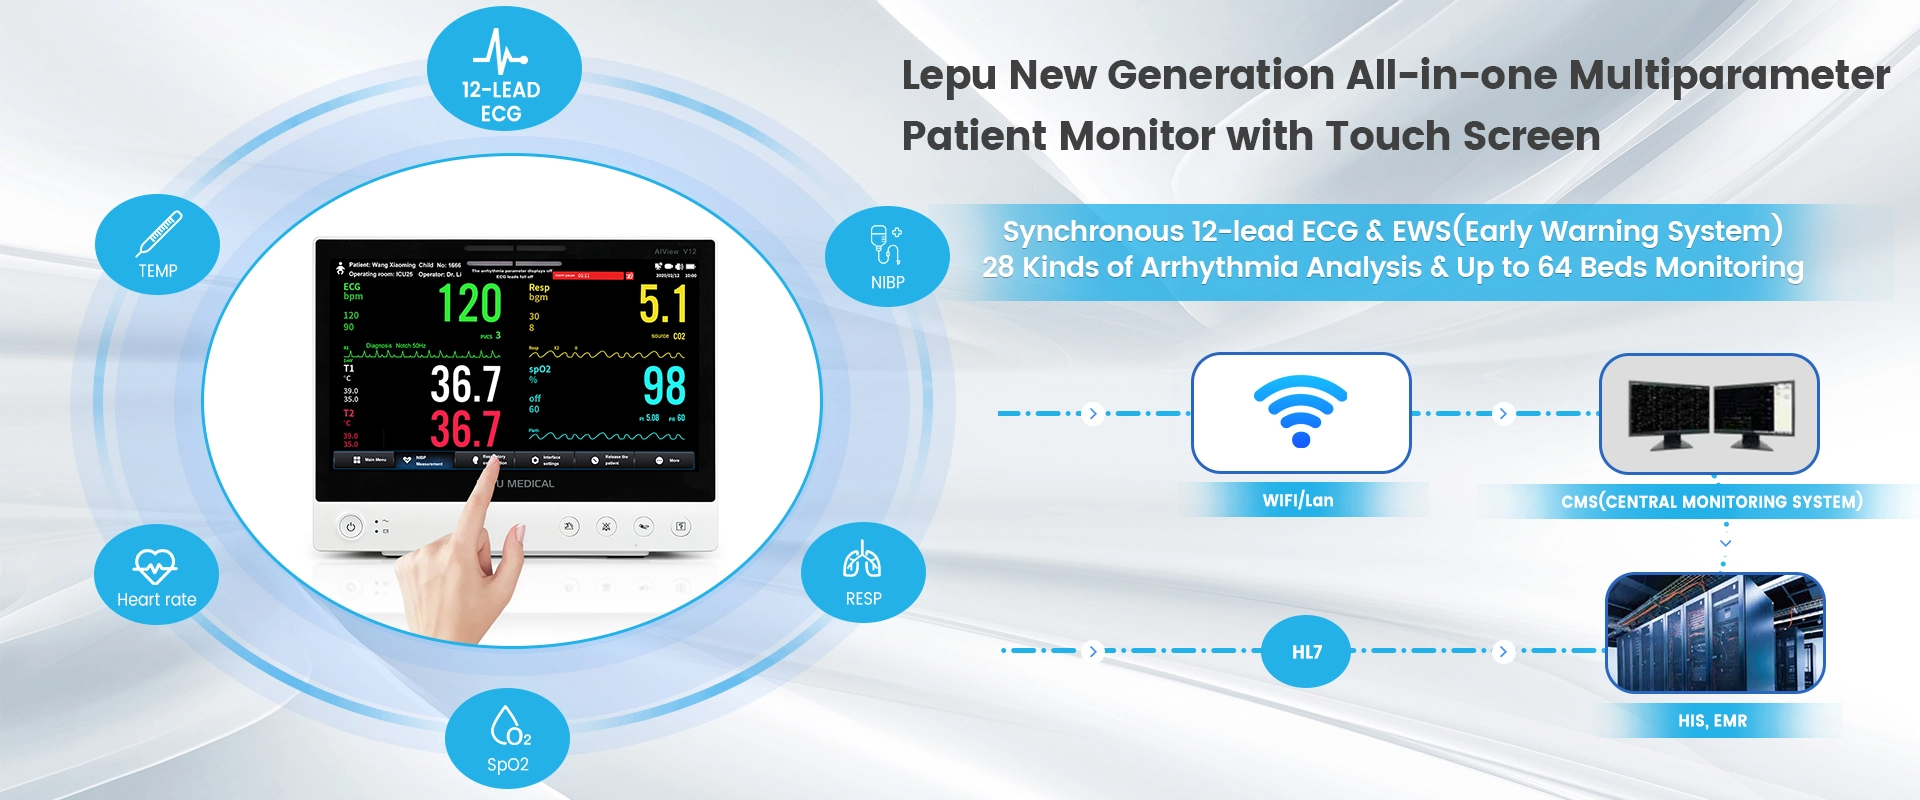 Lepu_Medical_AiView_Multiparameter_Patient_Monitor_Portable_All-in-one_Vital_Signs_Monitor_with_AI_Analysis_Diagnosis.jpg